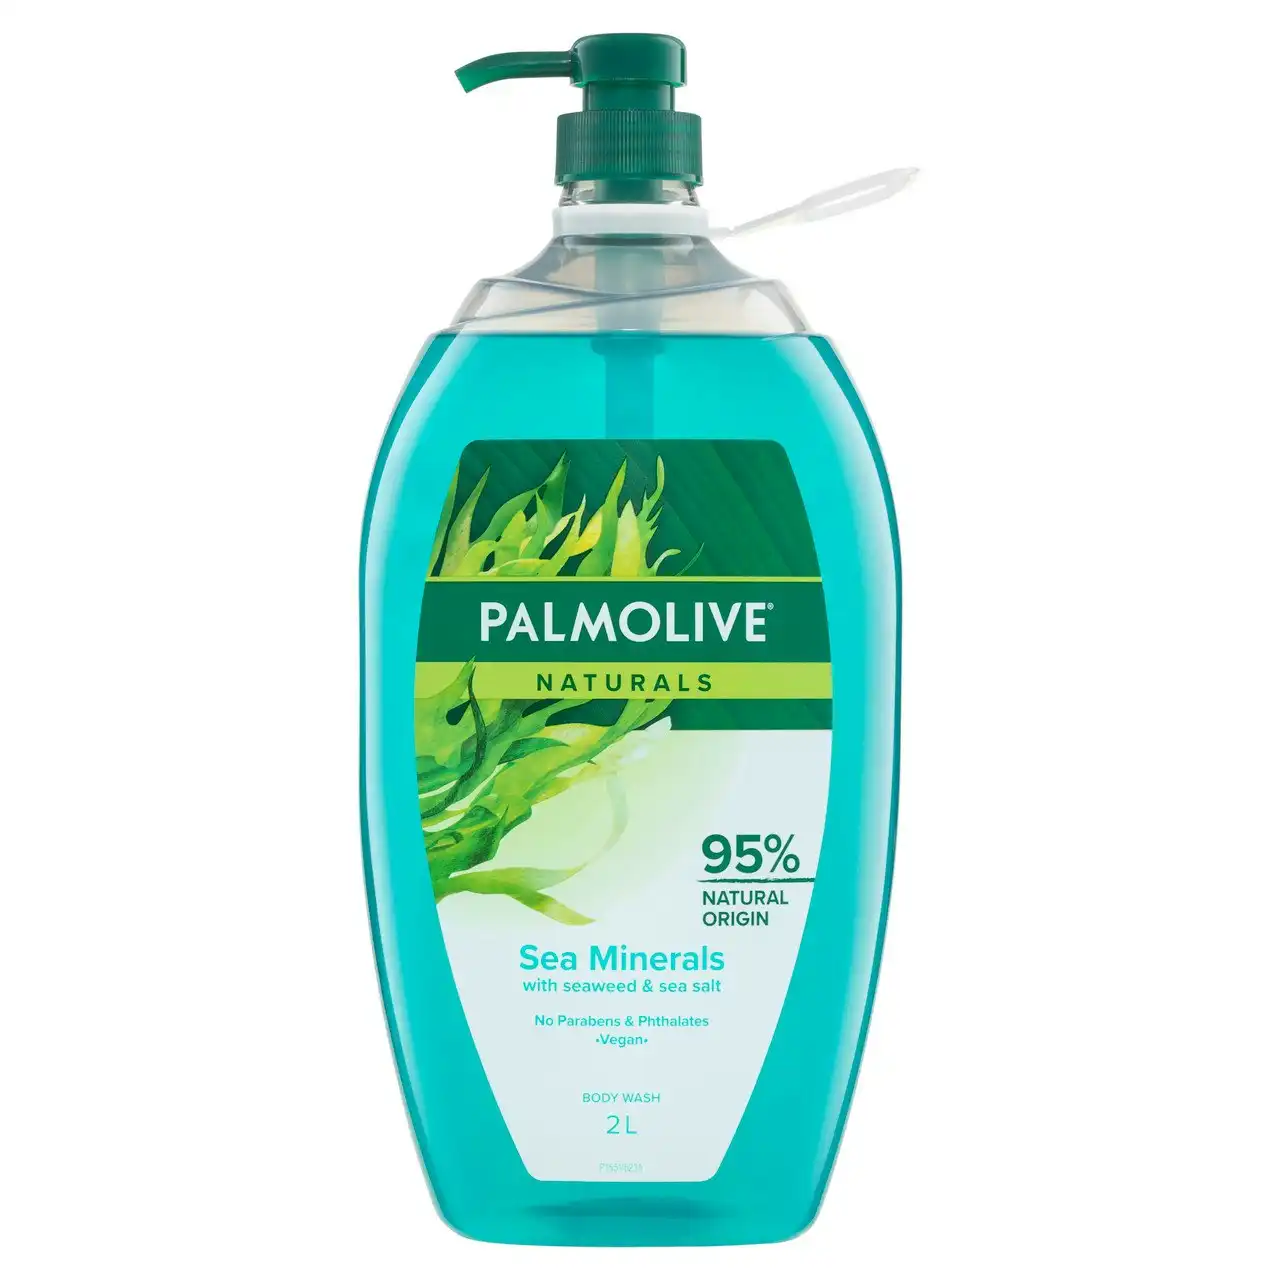 Palmolive Naturals Body Wash, 2L, Sea Minerals with Seaweed and Sea Salt, No Parabens